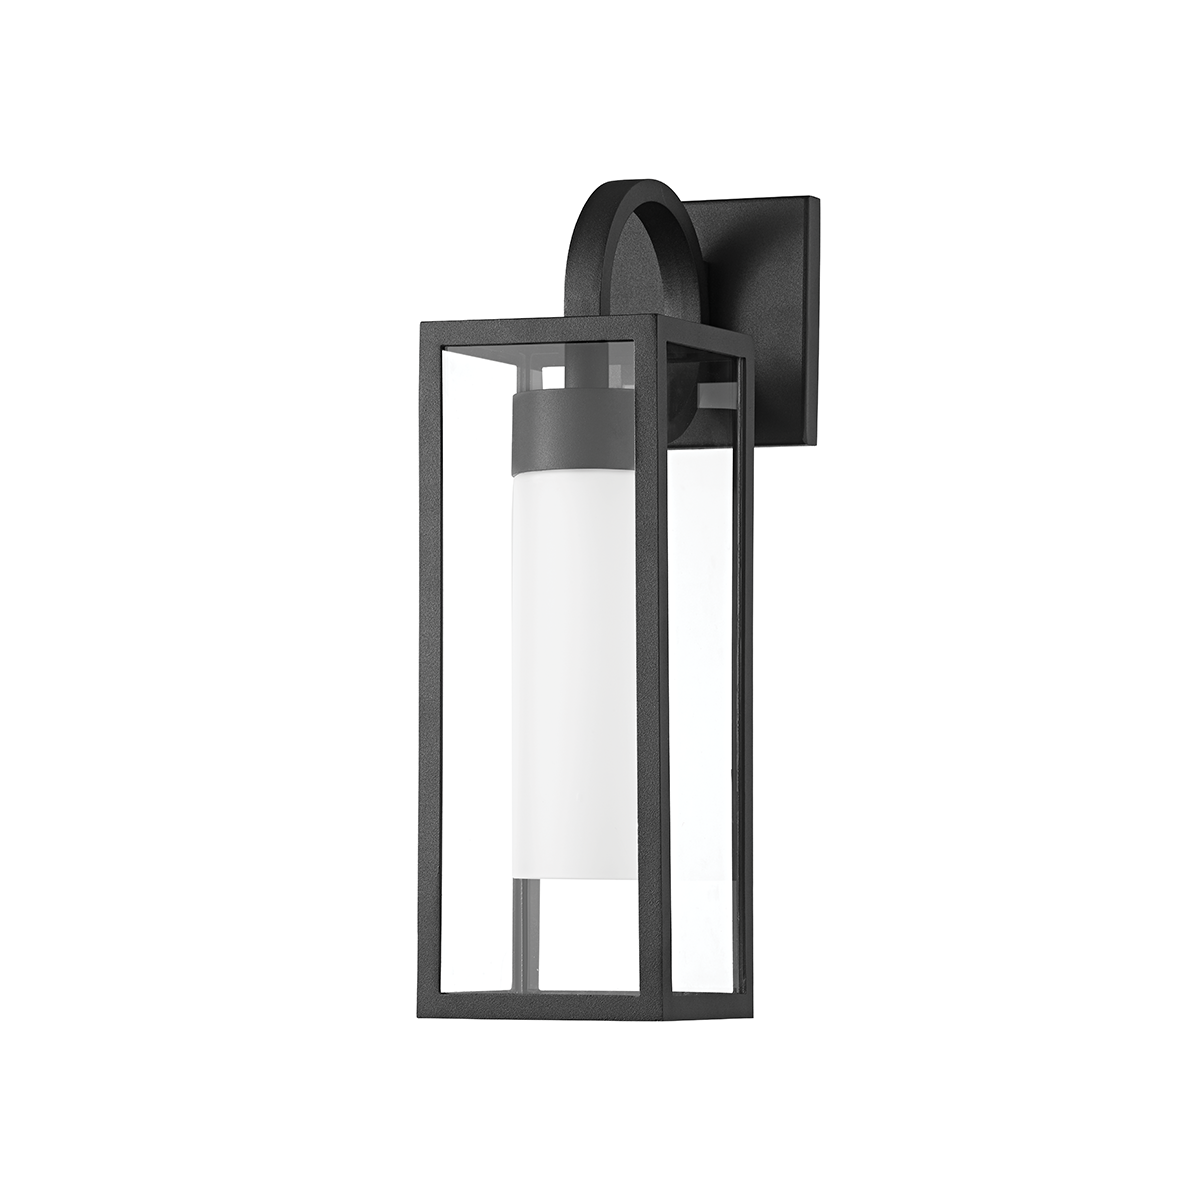 Troy Lighting 1 LIGHT SMALL EXTERIOR WALL SCONCE B6911 Outdoor l Wall Troy Lighting TEXTURE BLACK  